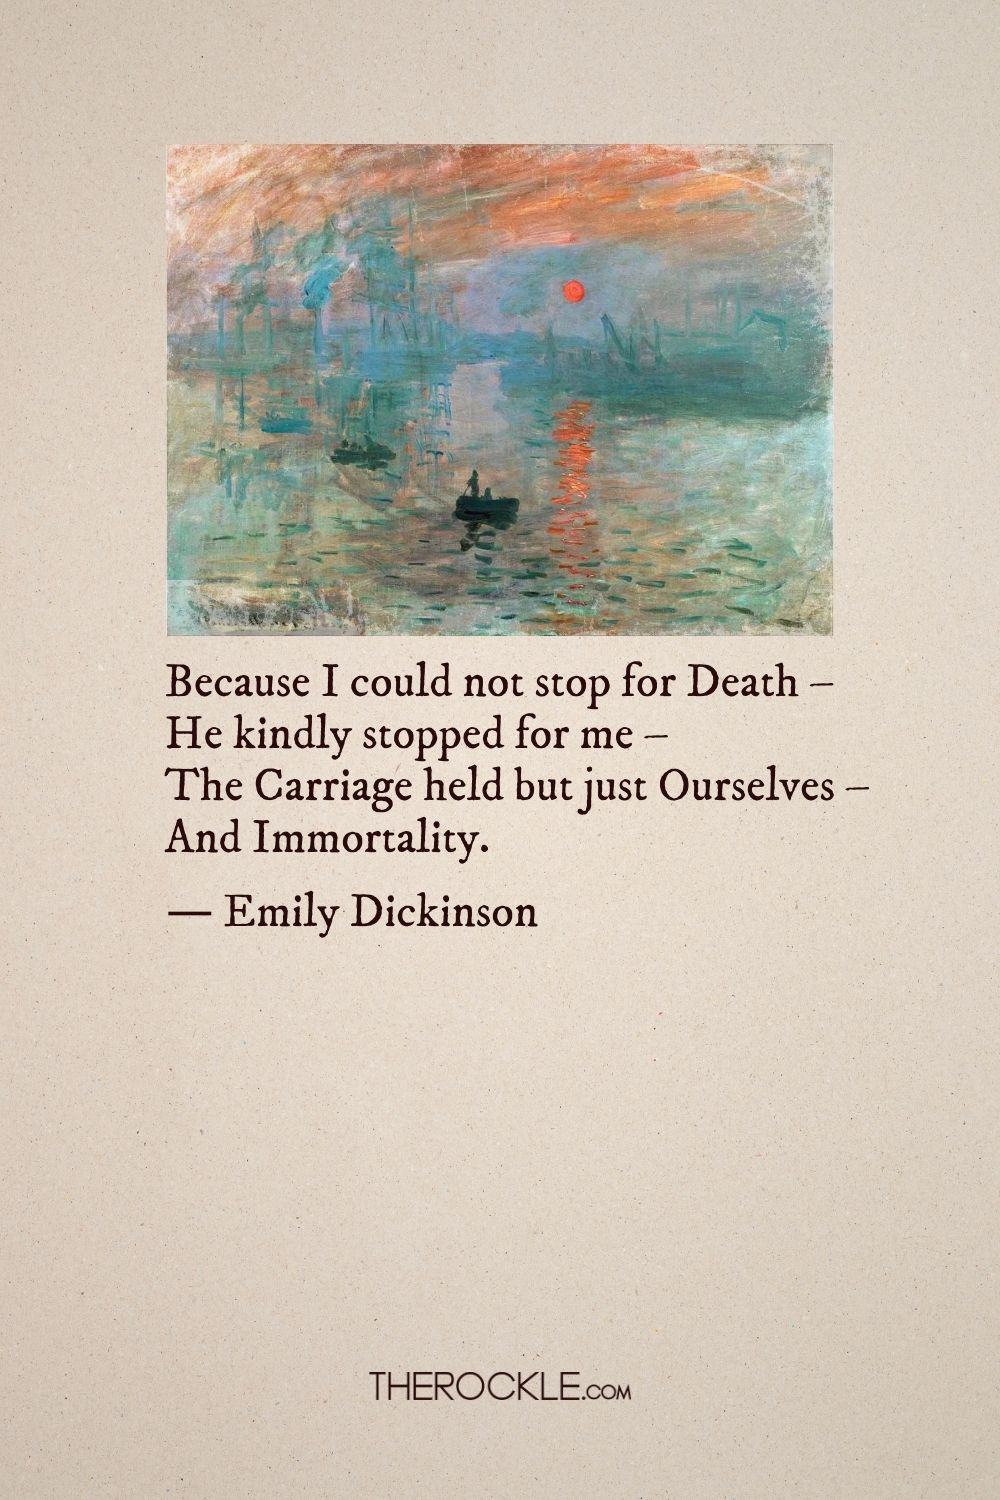 Emily Dickinson's quote about death